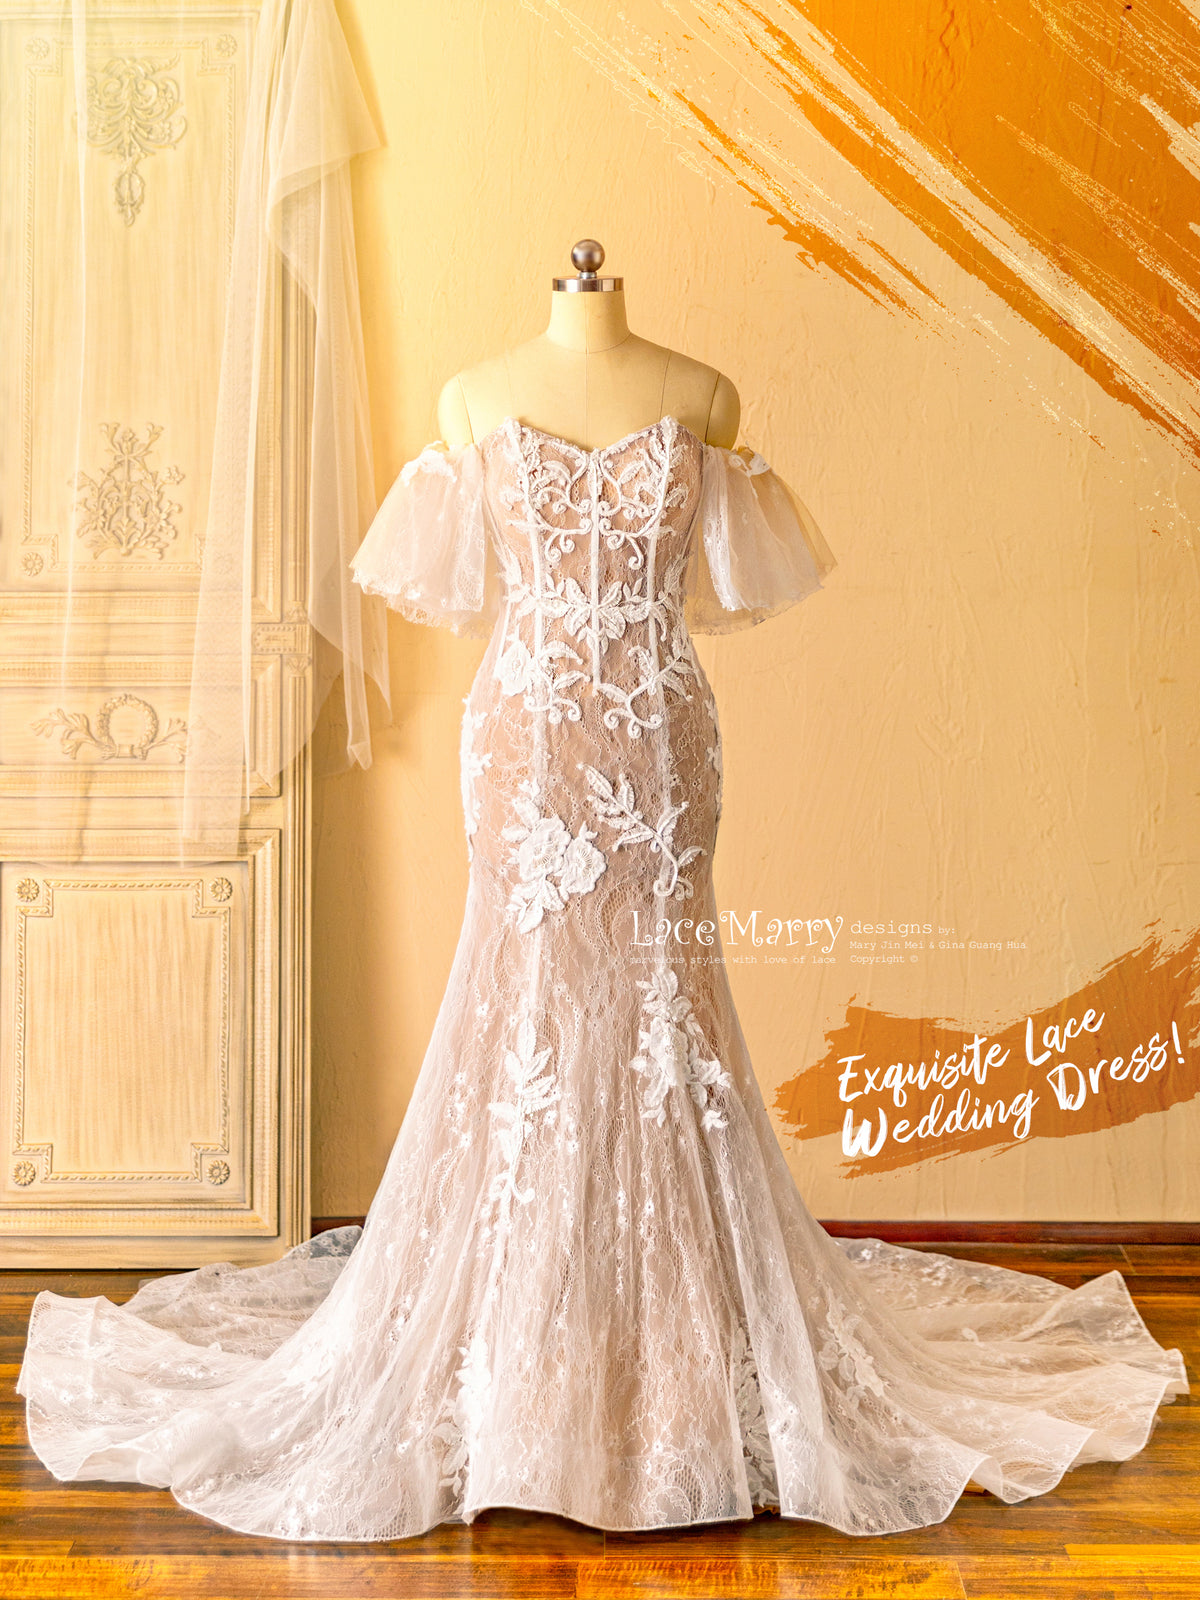 Amazing Lace Wedding Dress in Nude Color with Puffy Sleeves